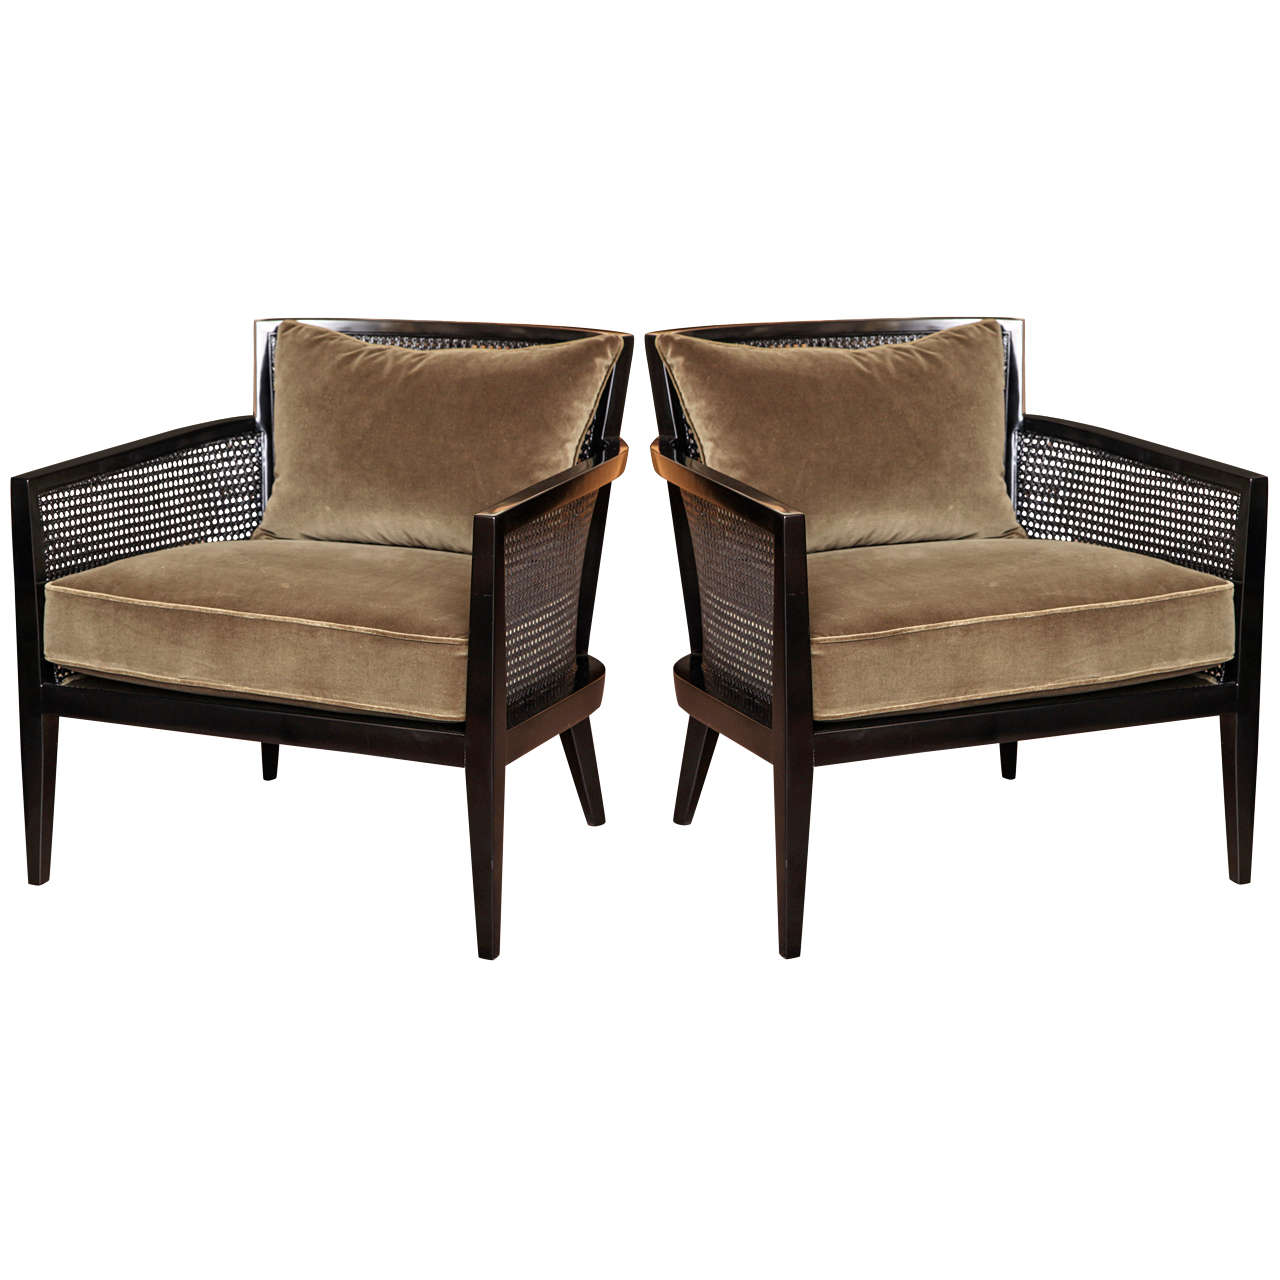 Pair Of Cane Armchairs By Harvey Probber c. 1960